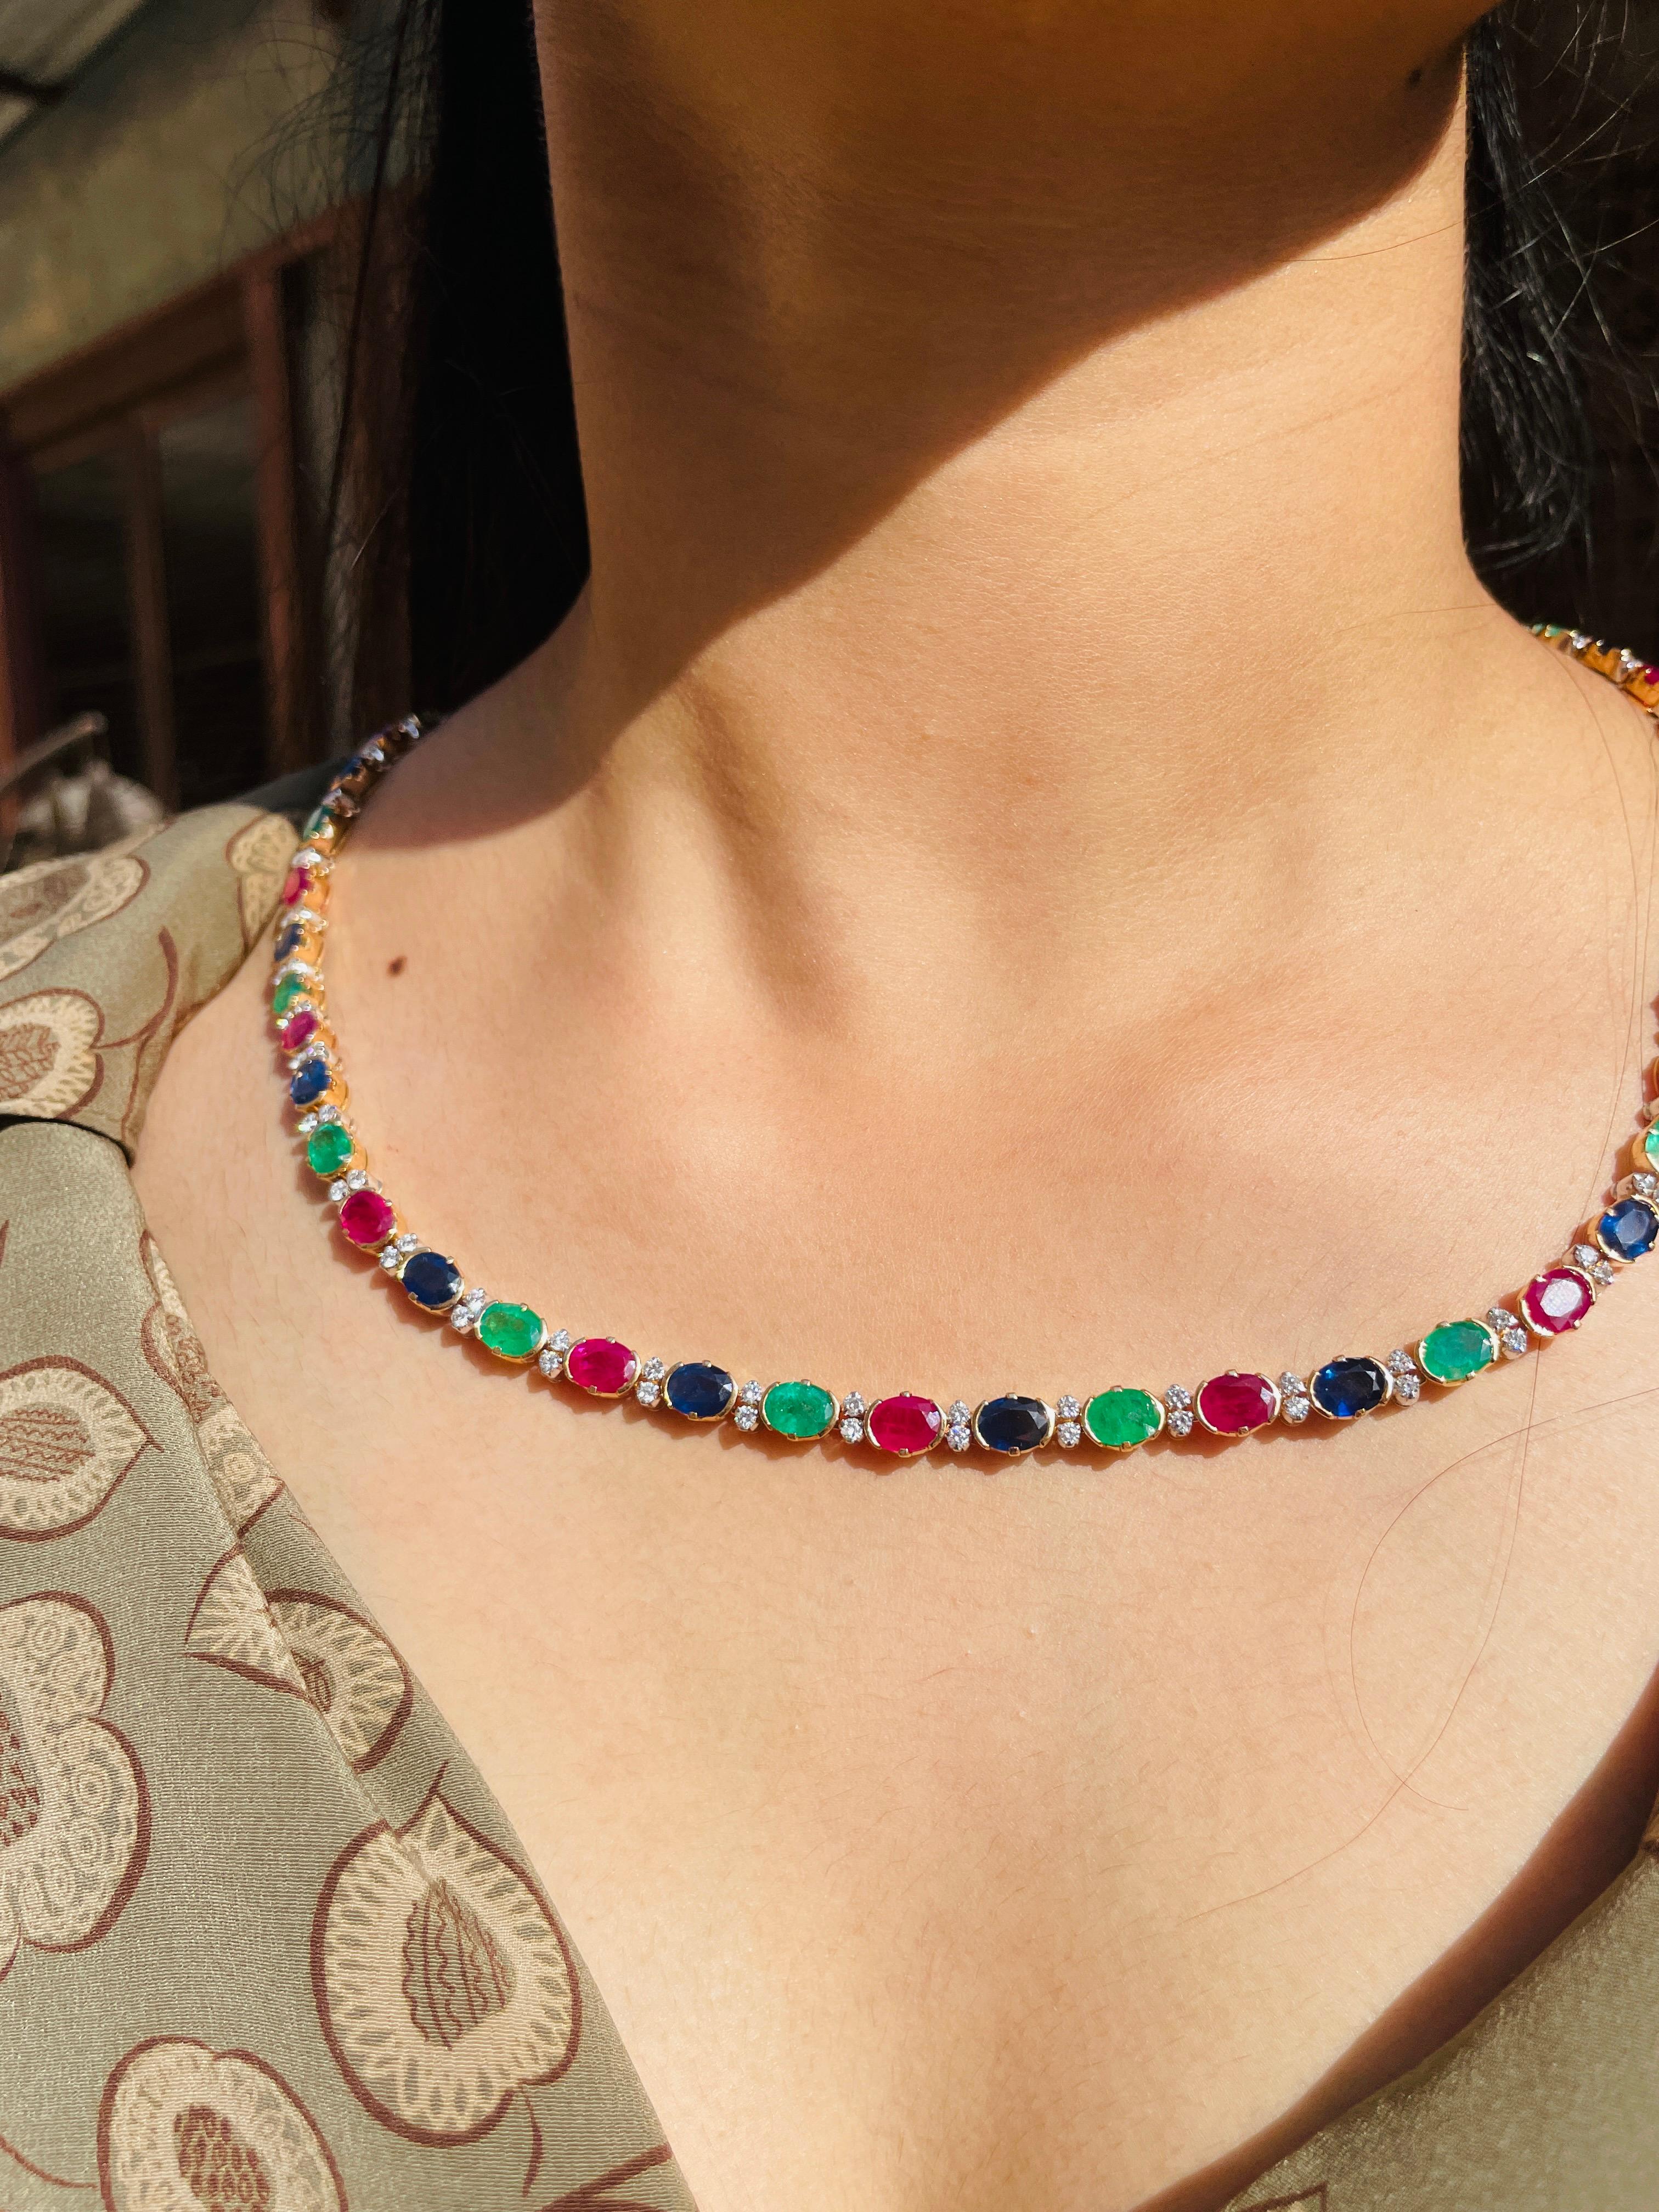 Multi Gemstone Necklace in 18K Gold studded with oval cut emerald, ruby, sapphire pieces and diamonds.
Accessorize your look with this elegant multi gemstone beaded necklace. This stunning piece of jewelry instantly elevates a casual look or dressy